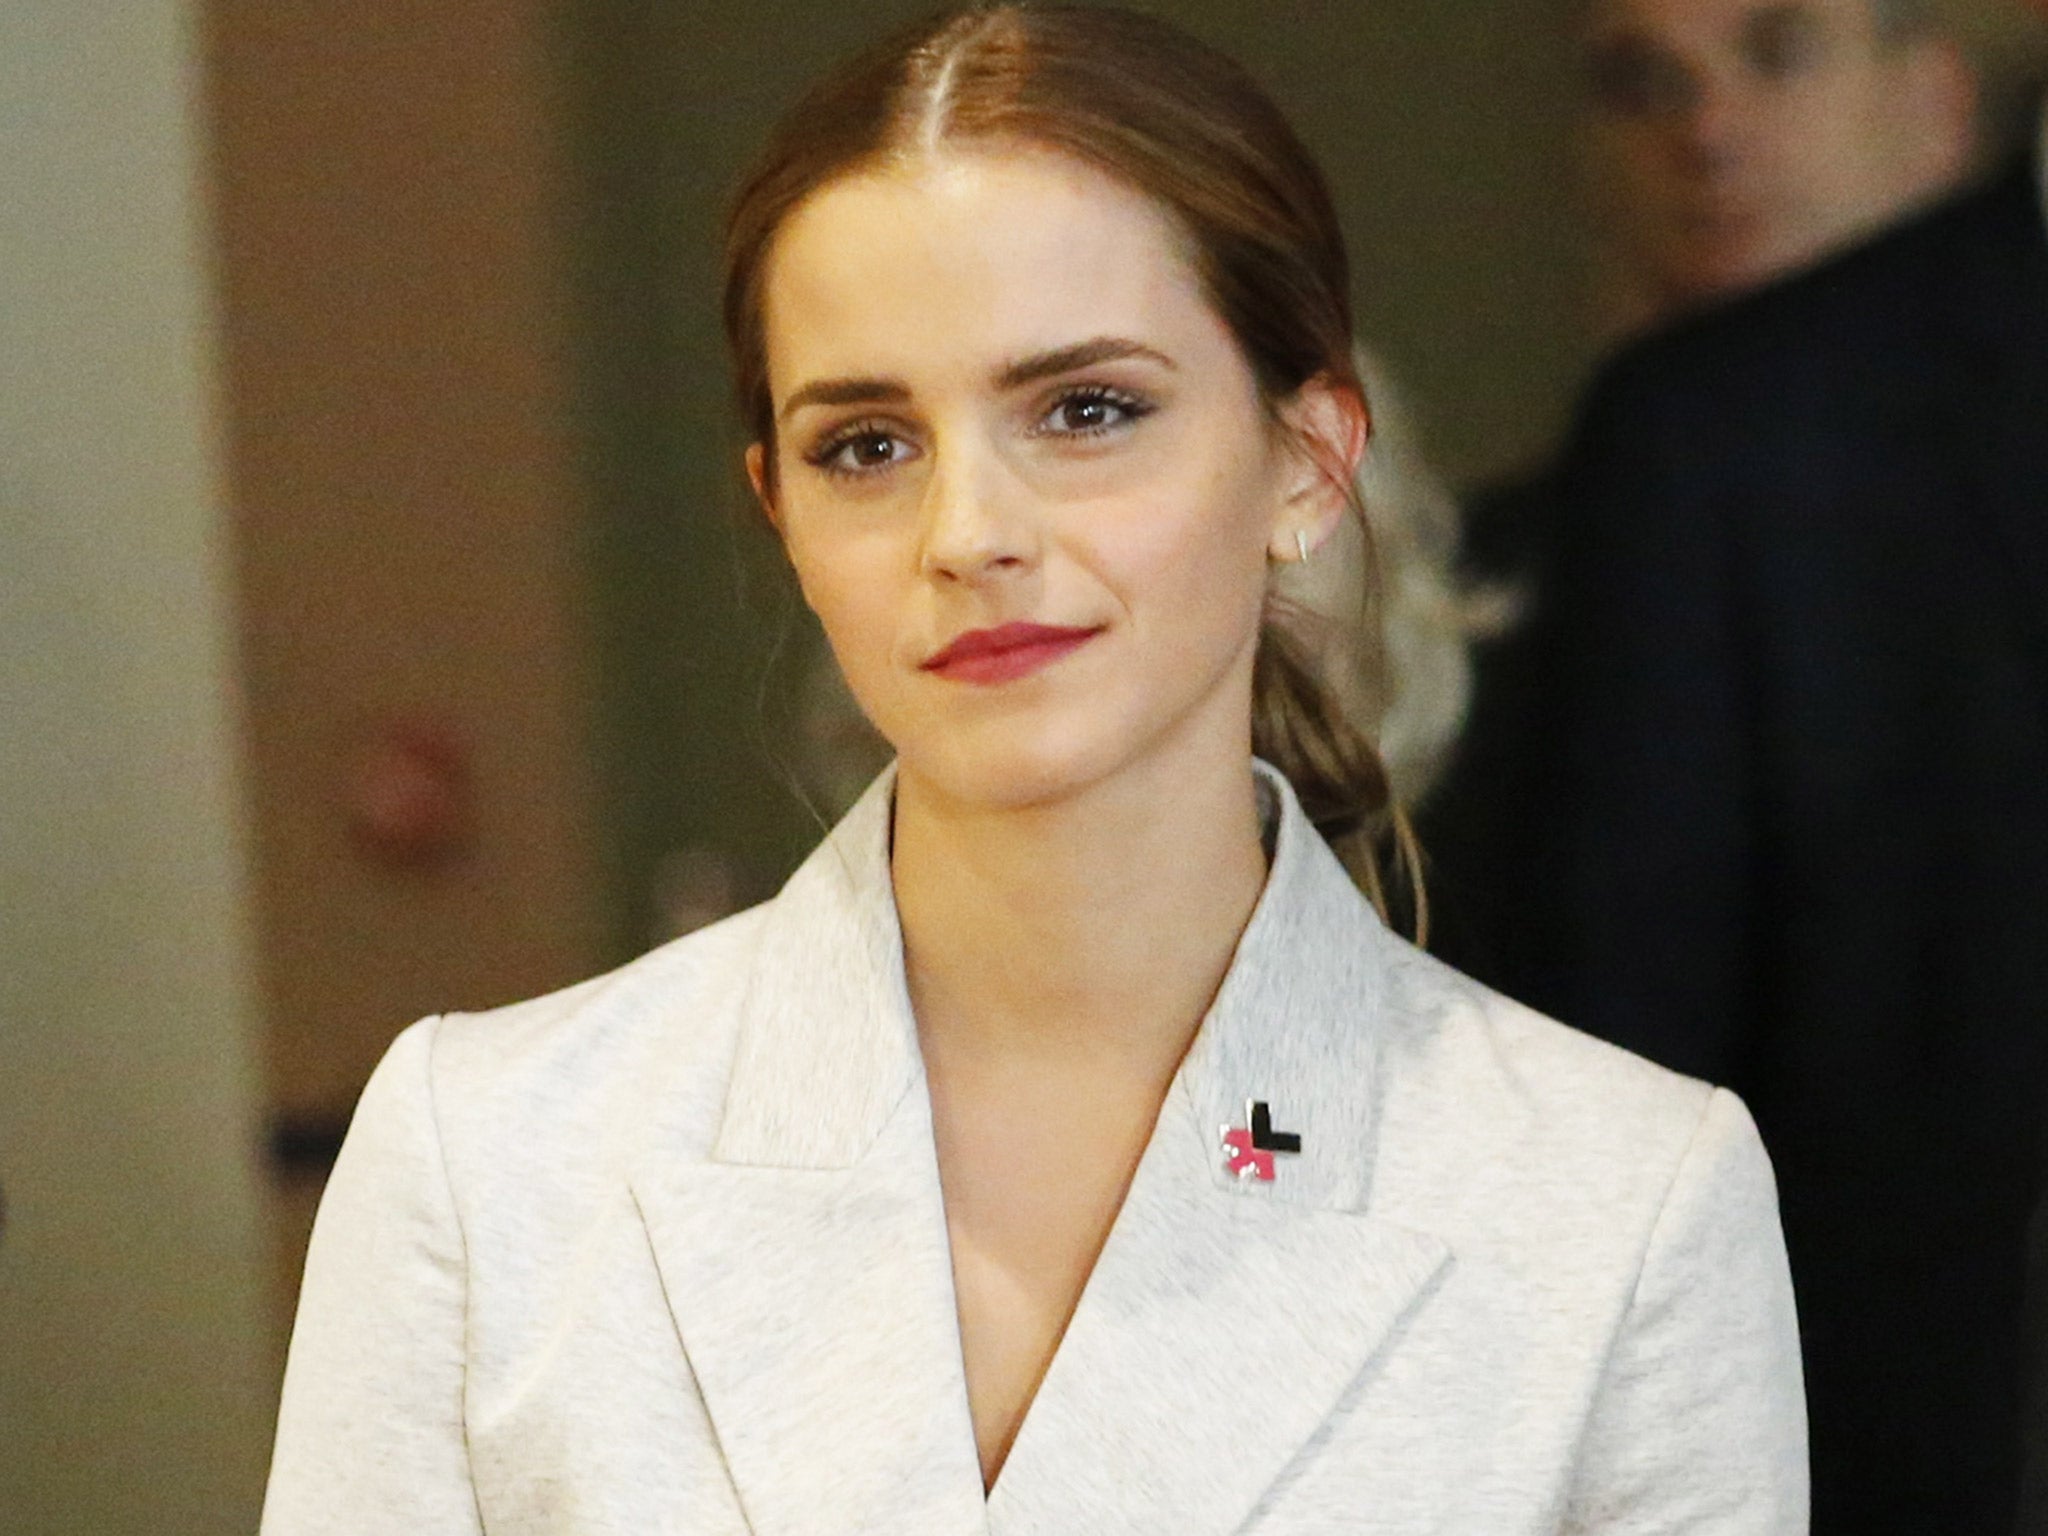 Actress Emma Watson is a high profile advocate of greater women’s rights throughout the world